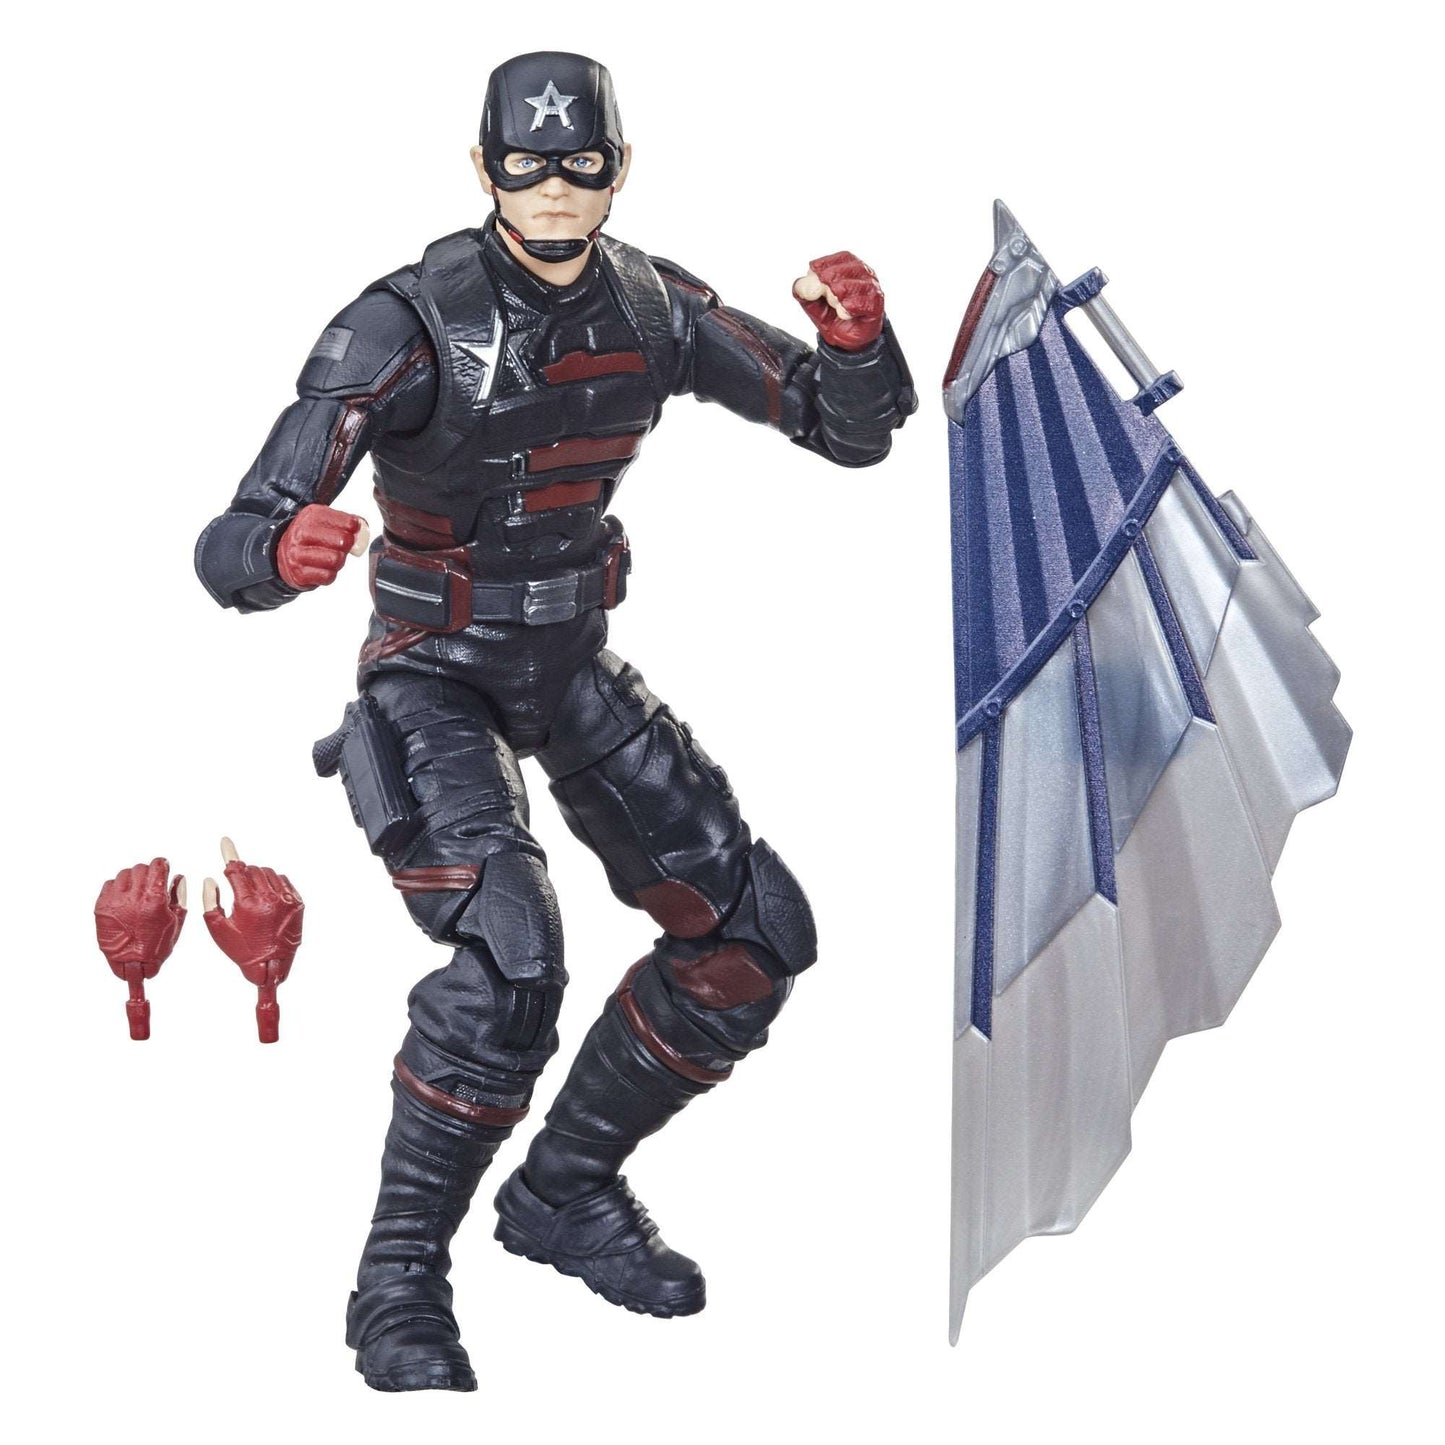 Hasbro Marvel Legends Series Disney+ Avengers Falcon and the Winter Soldier U.S. Agent figure and accessories